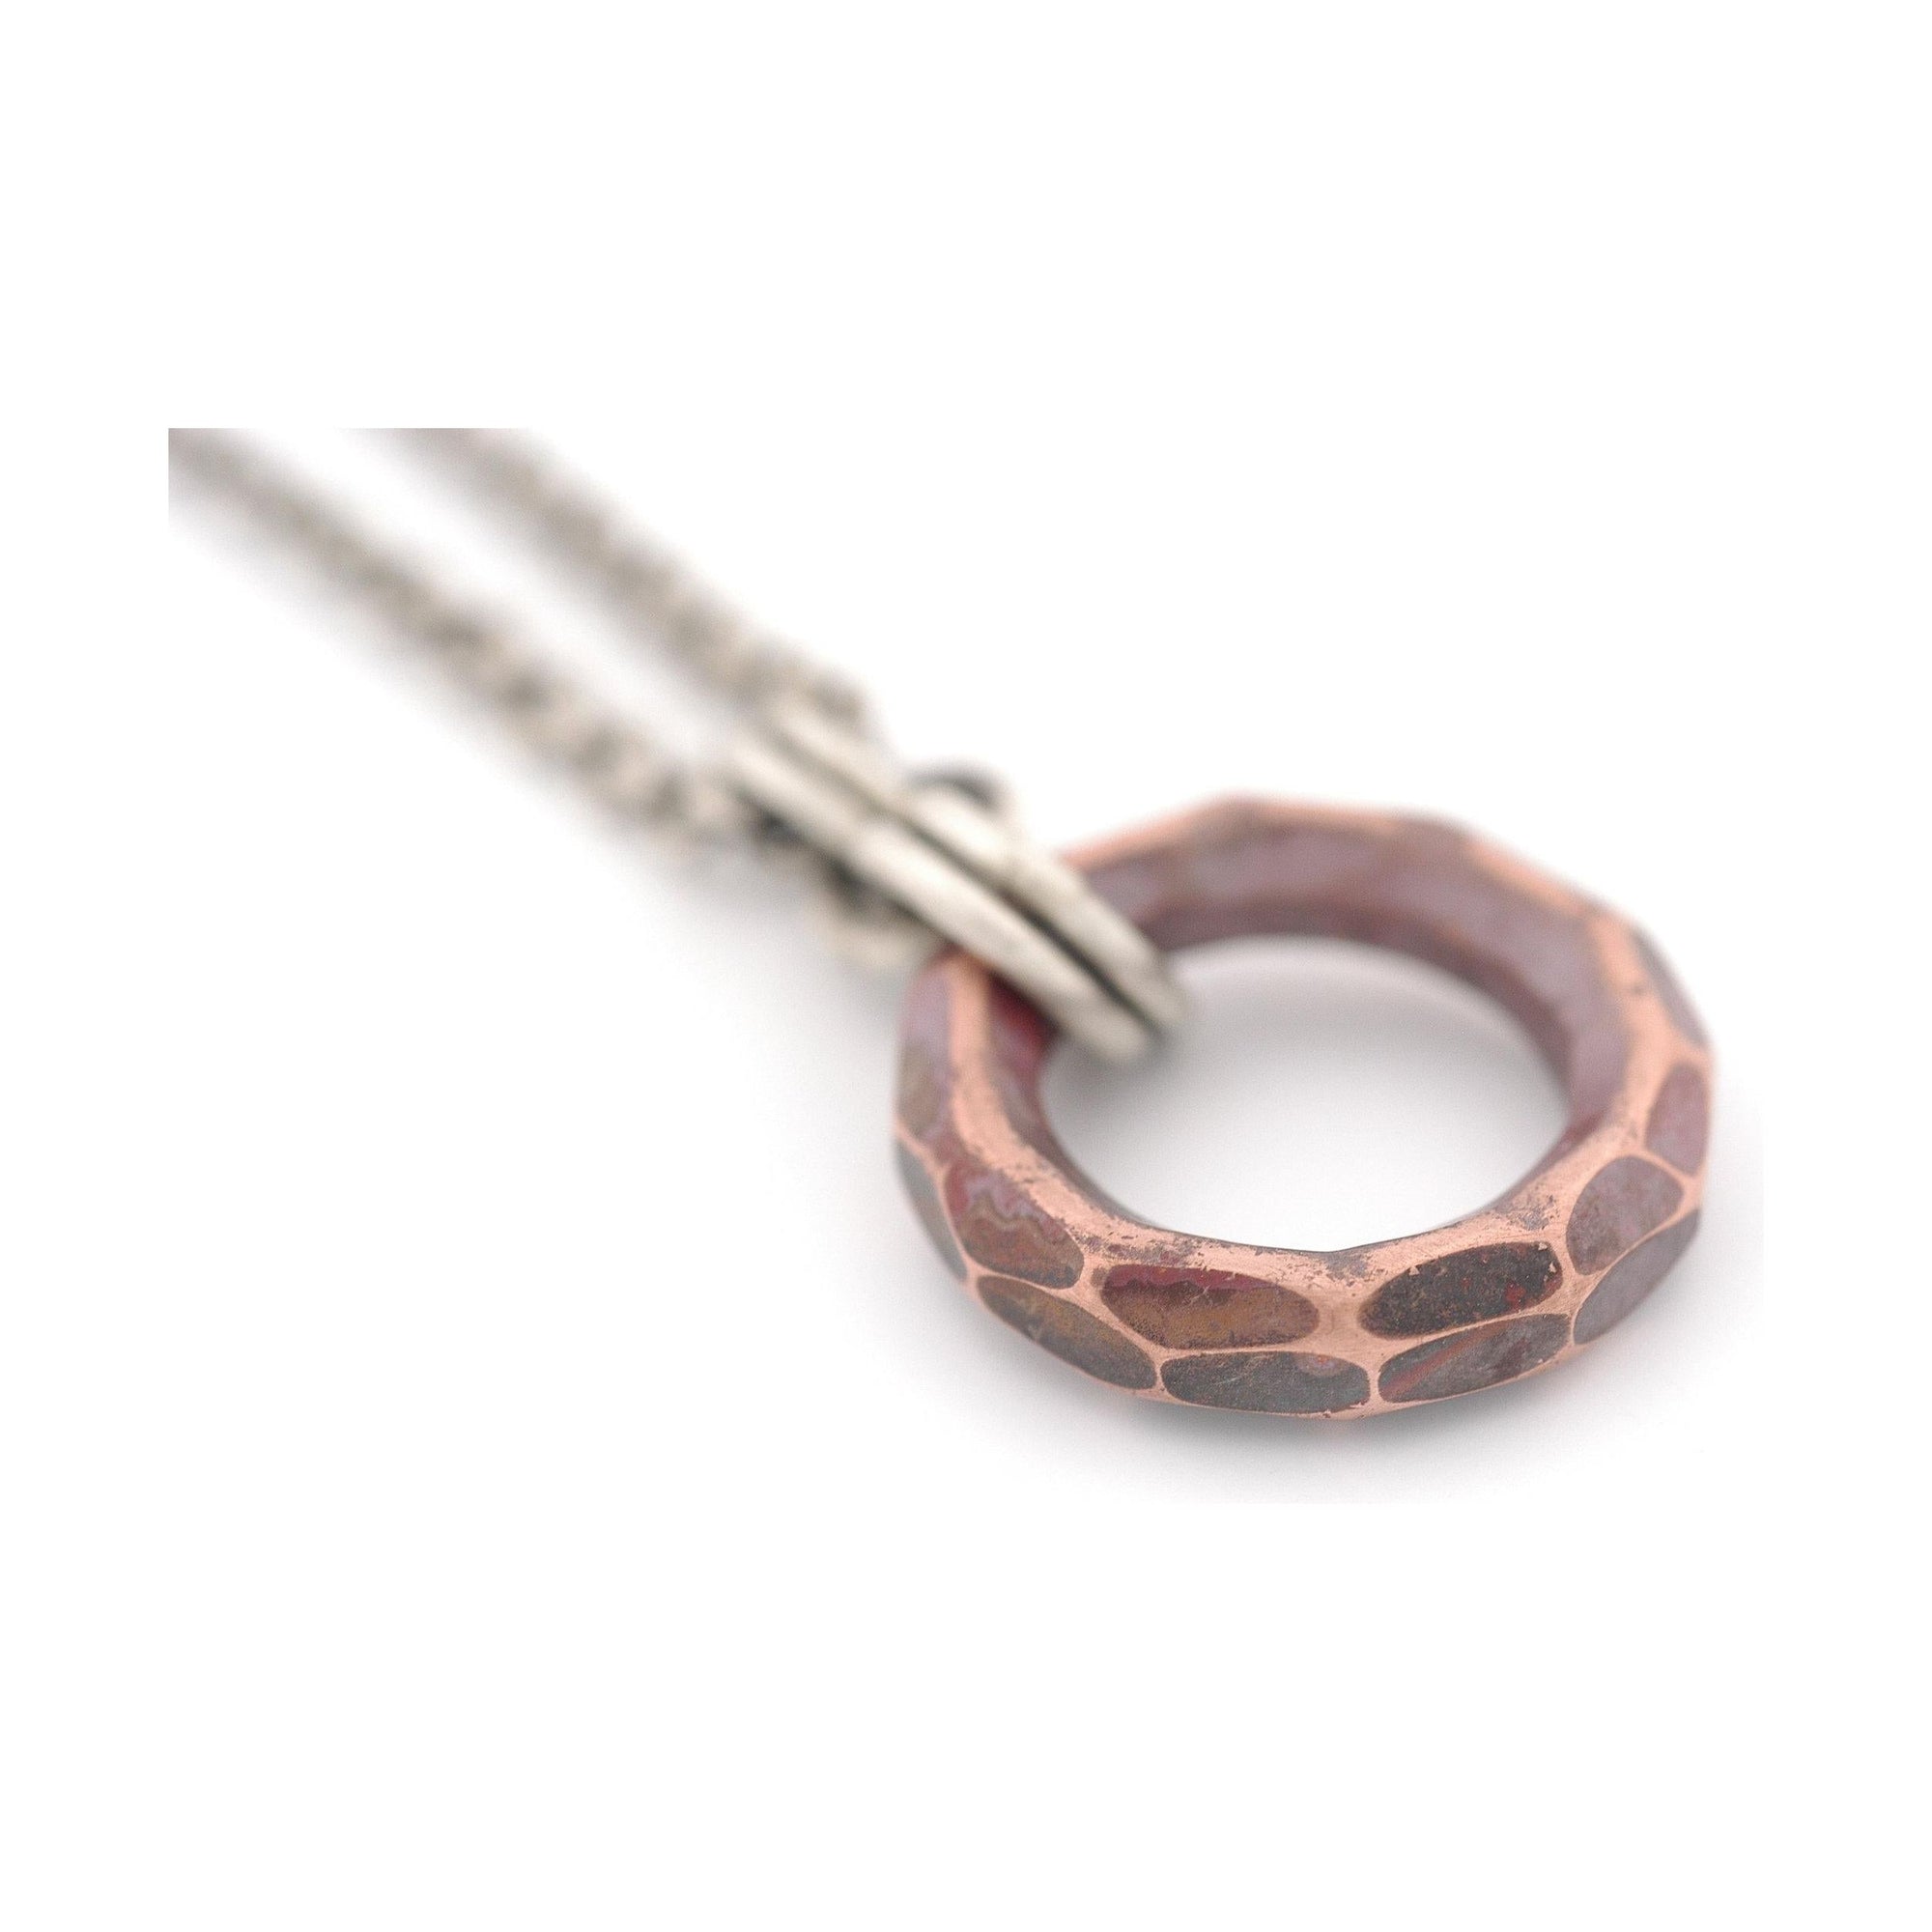 Textured Copper Circle